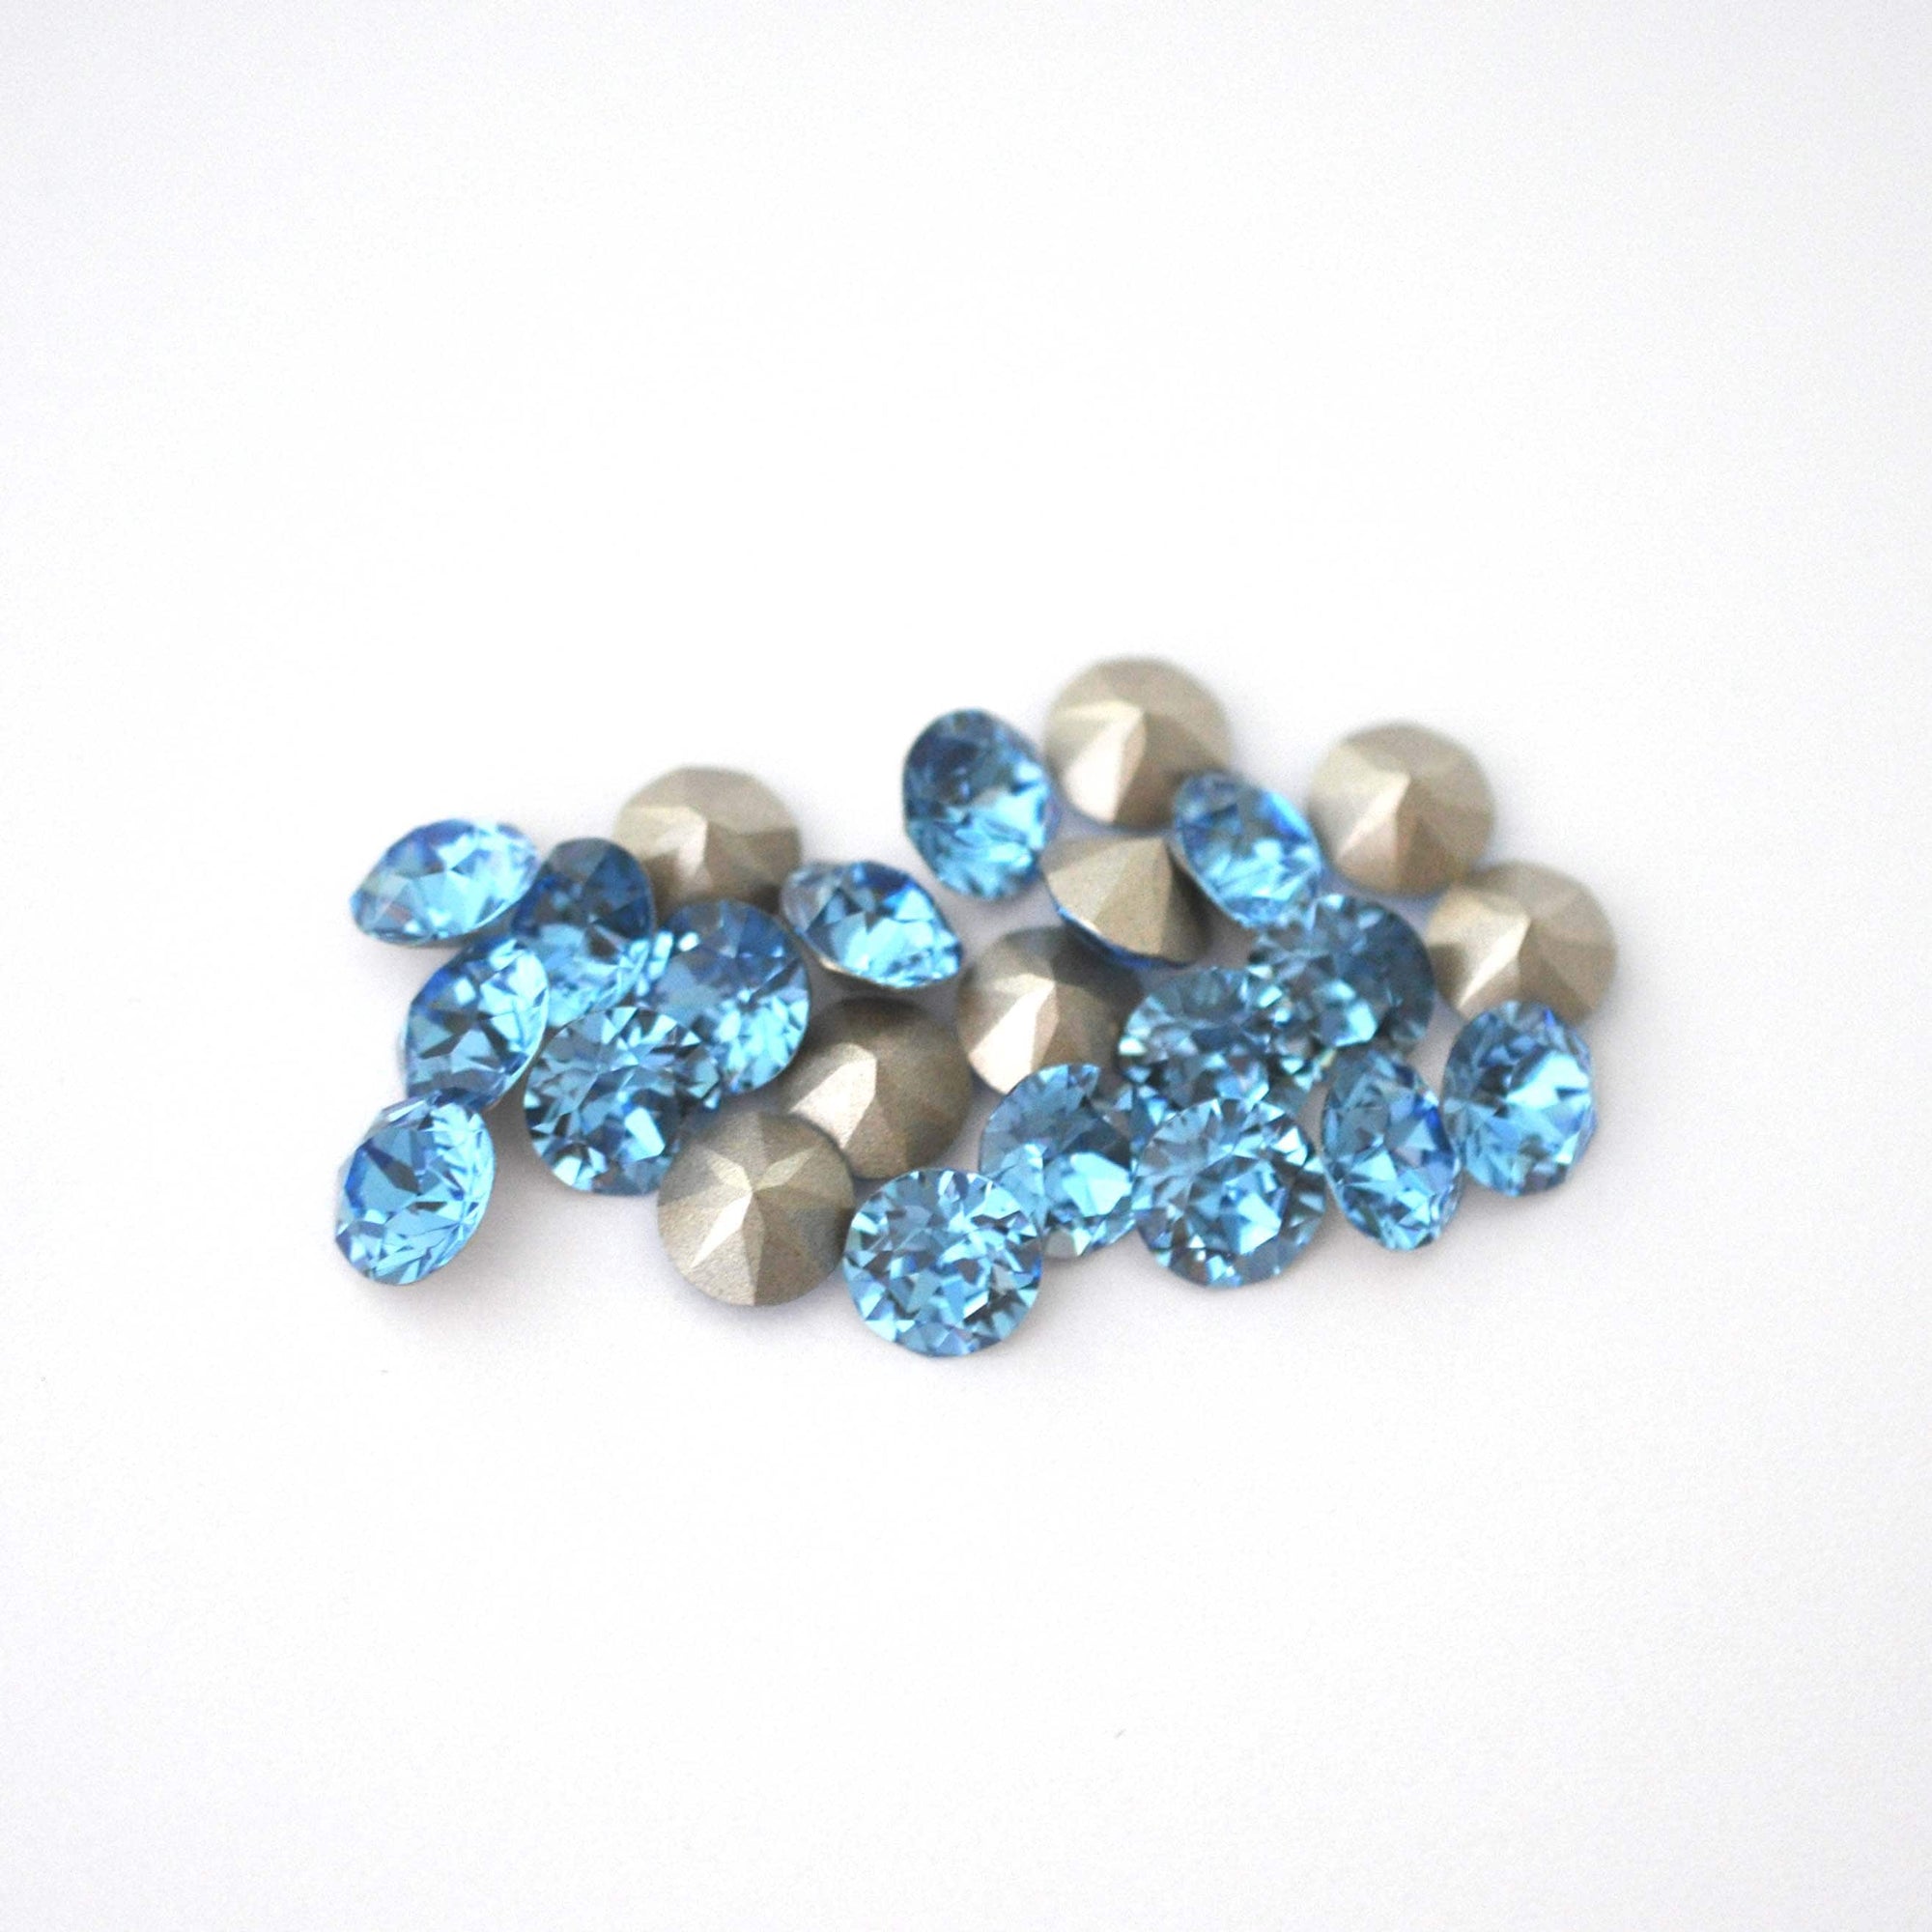 Cool Blue 39ss 1088 Chatons 8mm Barton Crystals - Multiple Pack Sizes Available